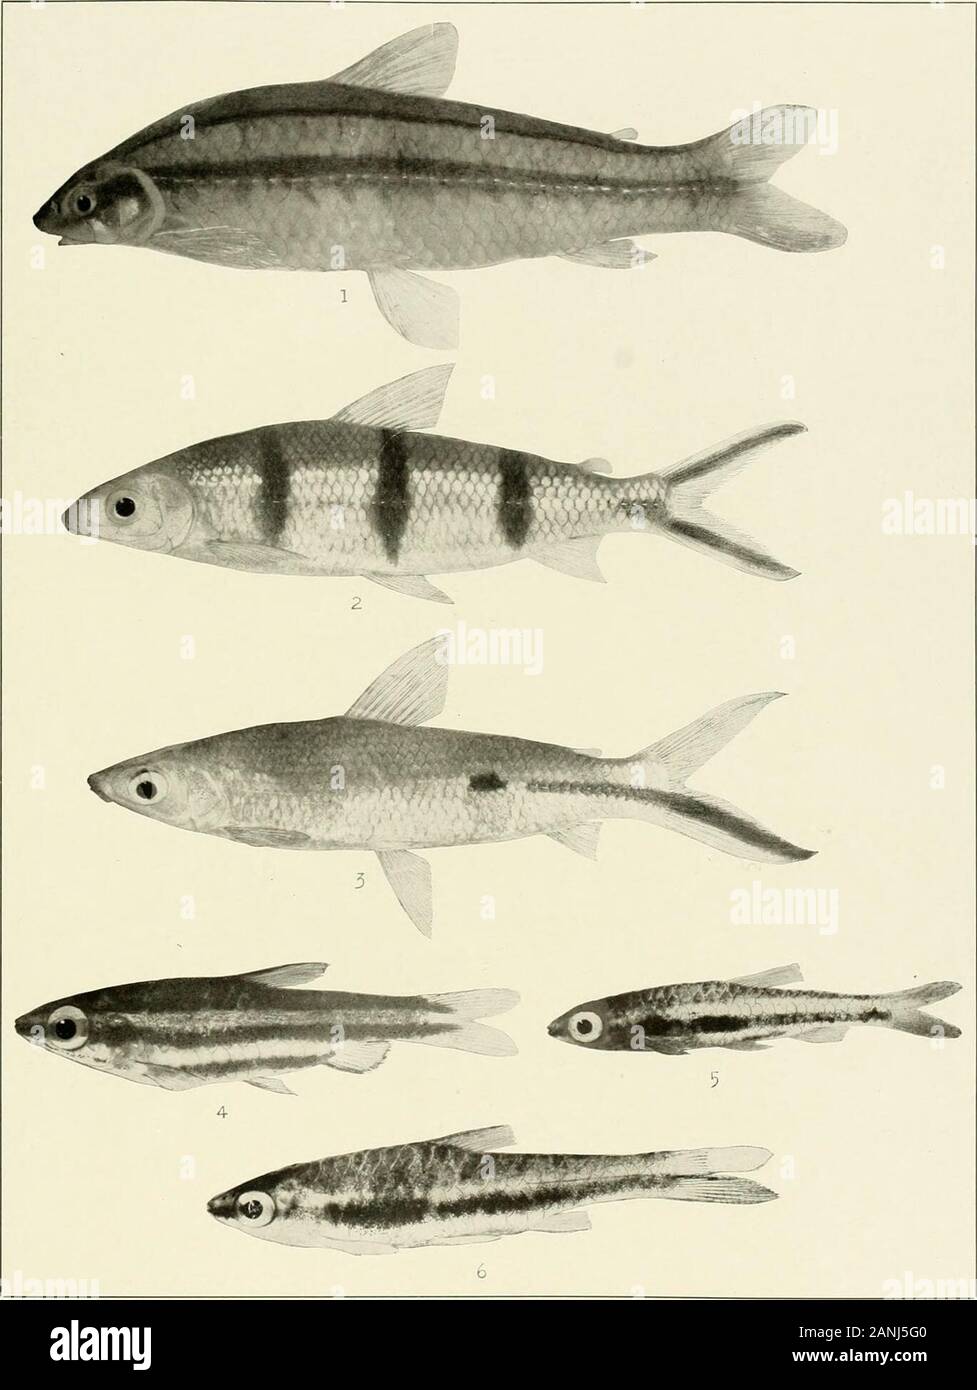 The freshwater fishes of British Guiana, including a study of the ecological grouping of species and the relation of the fauna of the plateau to that of the lowlands . ( 4 • **»»##• * * ?• • * * &lt;. I. Curimatus schomburgki GUnther. L46 mm. No. 2071a. 2. Prochilodus marvpicru Eigen-mann. (Type.) 282 mm. No. 2066. 3. Tylobronchus maculosus Eigenmann. (Type.) 113nun. No. 1923. 4. Chilodus punctatus Muller and Troschel. 77 nun. No. 1916. Memoirs Carnegie Museum, Vol. V. Plate XXXVI.. 1. Parodon bifasciatus Eigenmann. (Type.) 104 mm. No. 192). 2. Hemiodus g/uadrimaculatus Pella-grin. 125 mm. No. Stock Photo